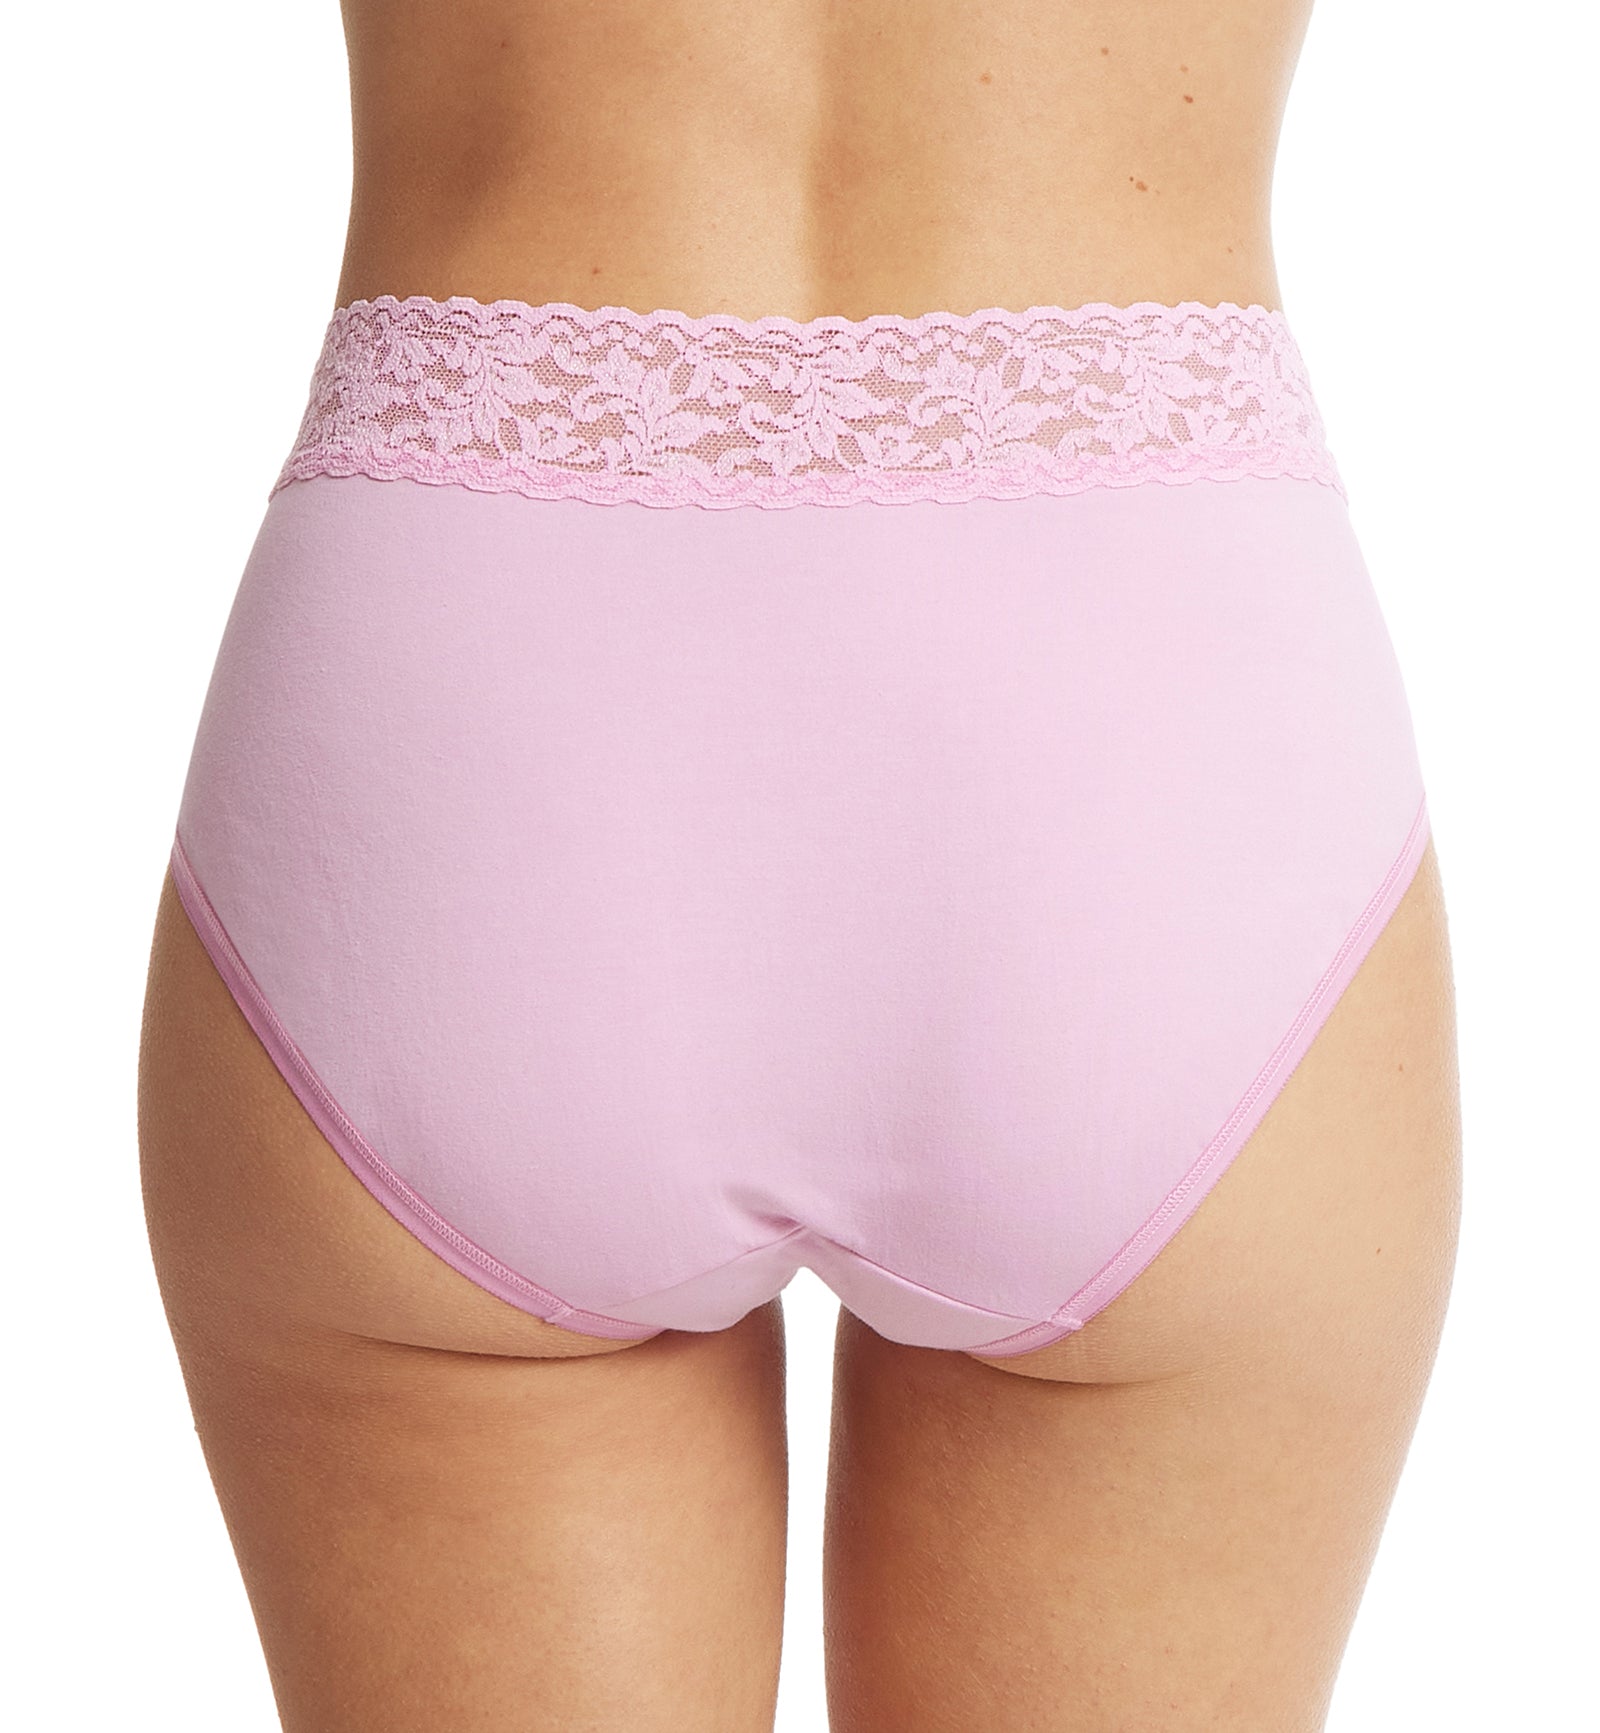 Hanky Panky Cotton French Brief with Lace (892461),Small,Lotus Flower - Lotus Flower,Small